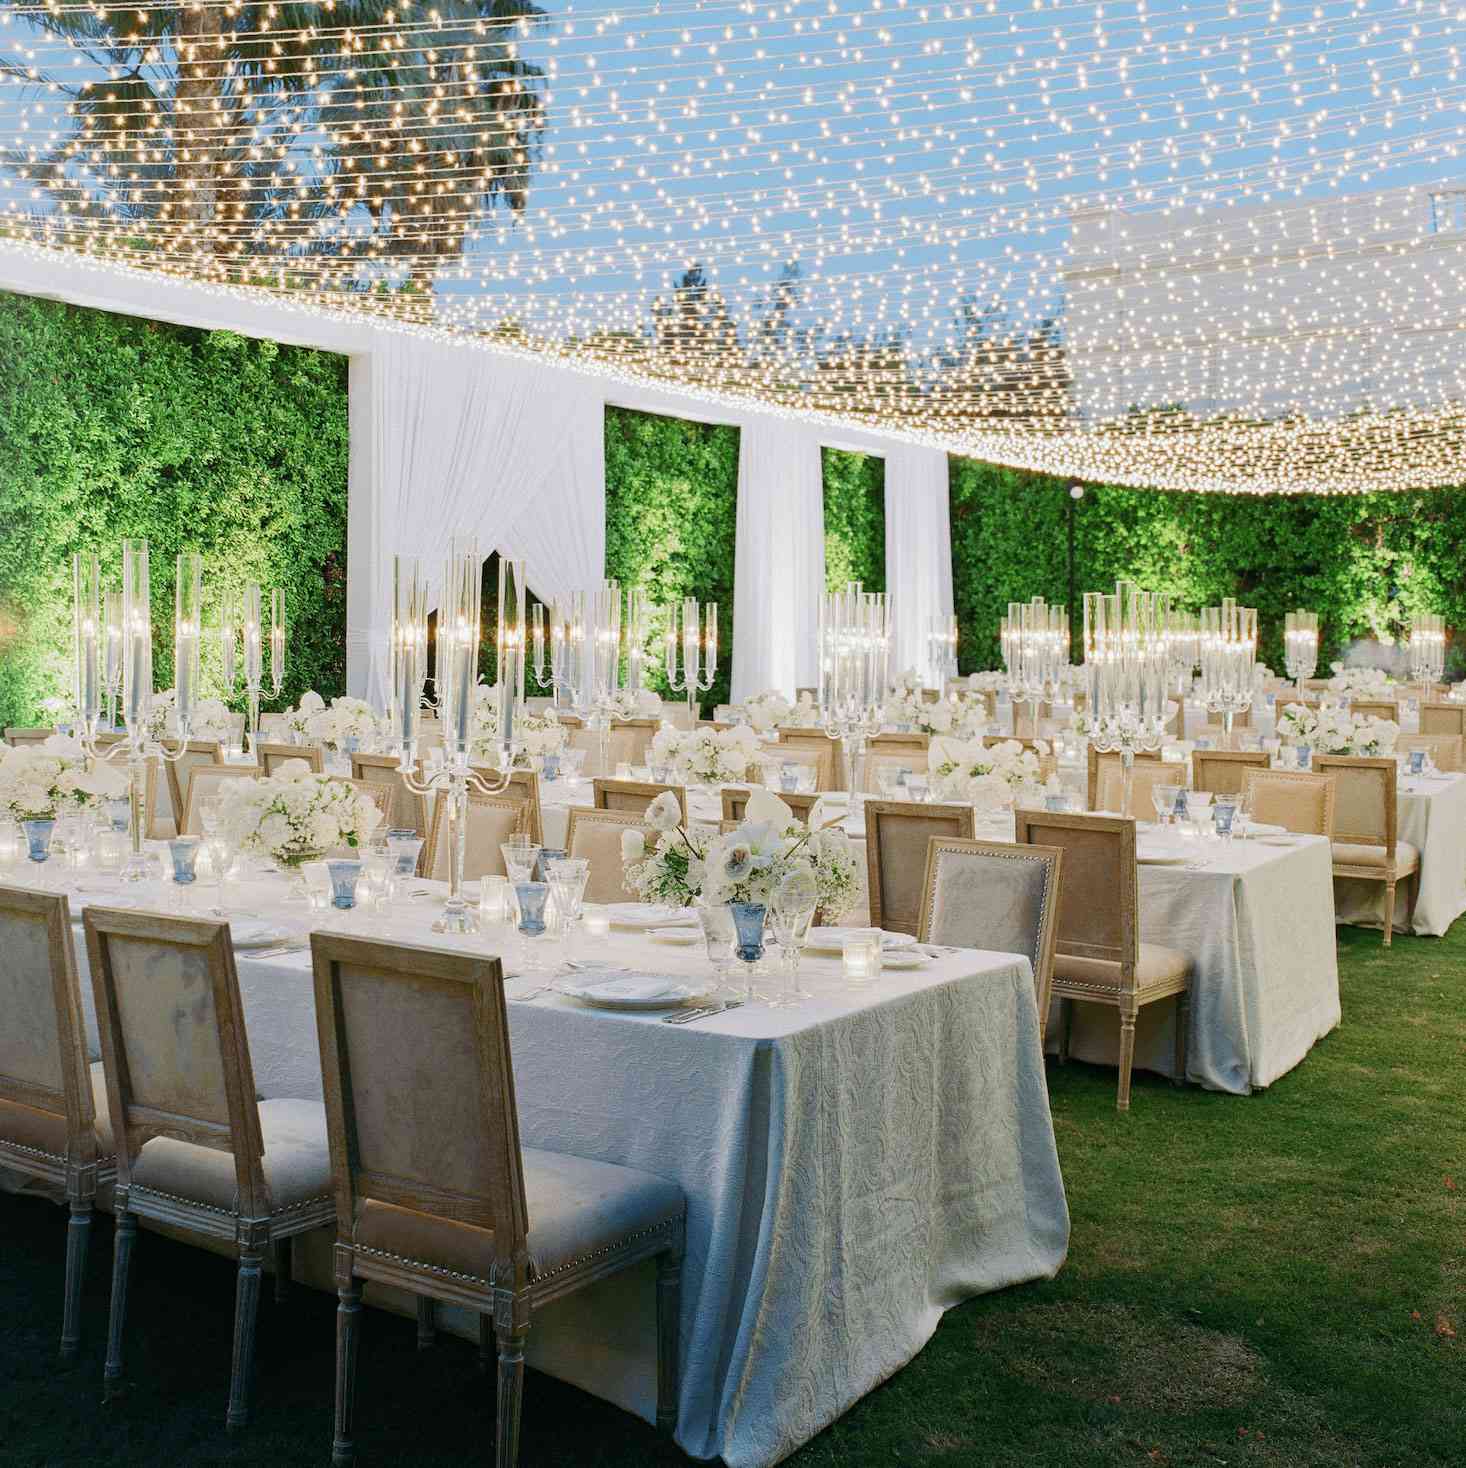 Dining tables and chairs set up for a wedding reception 